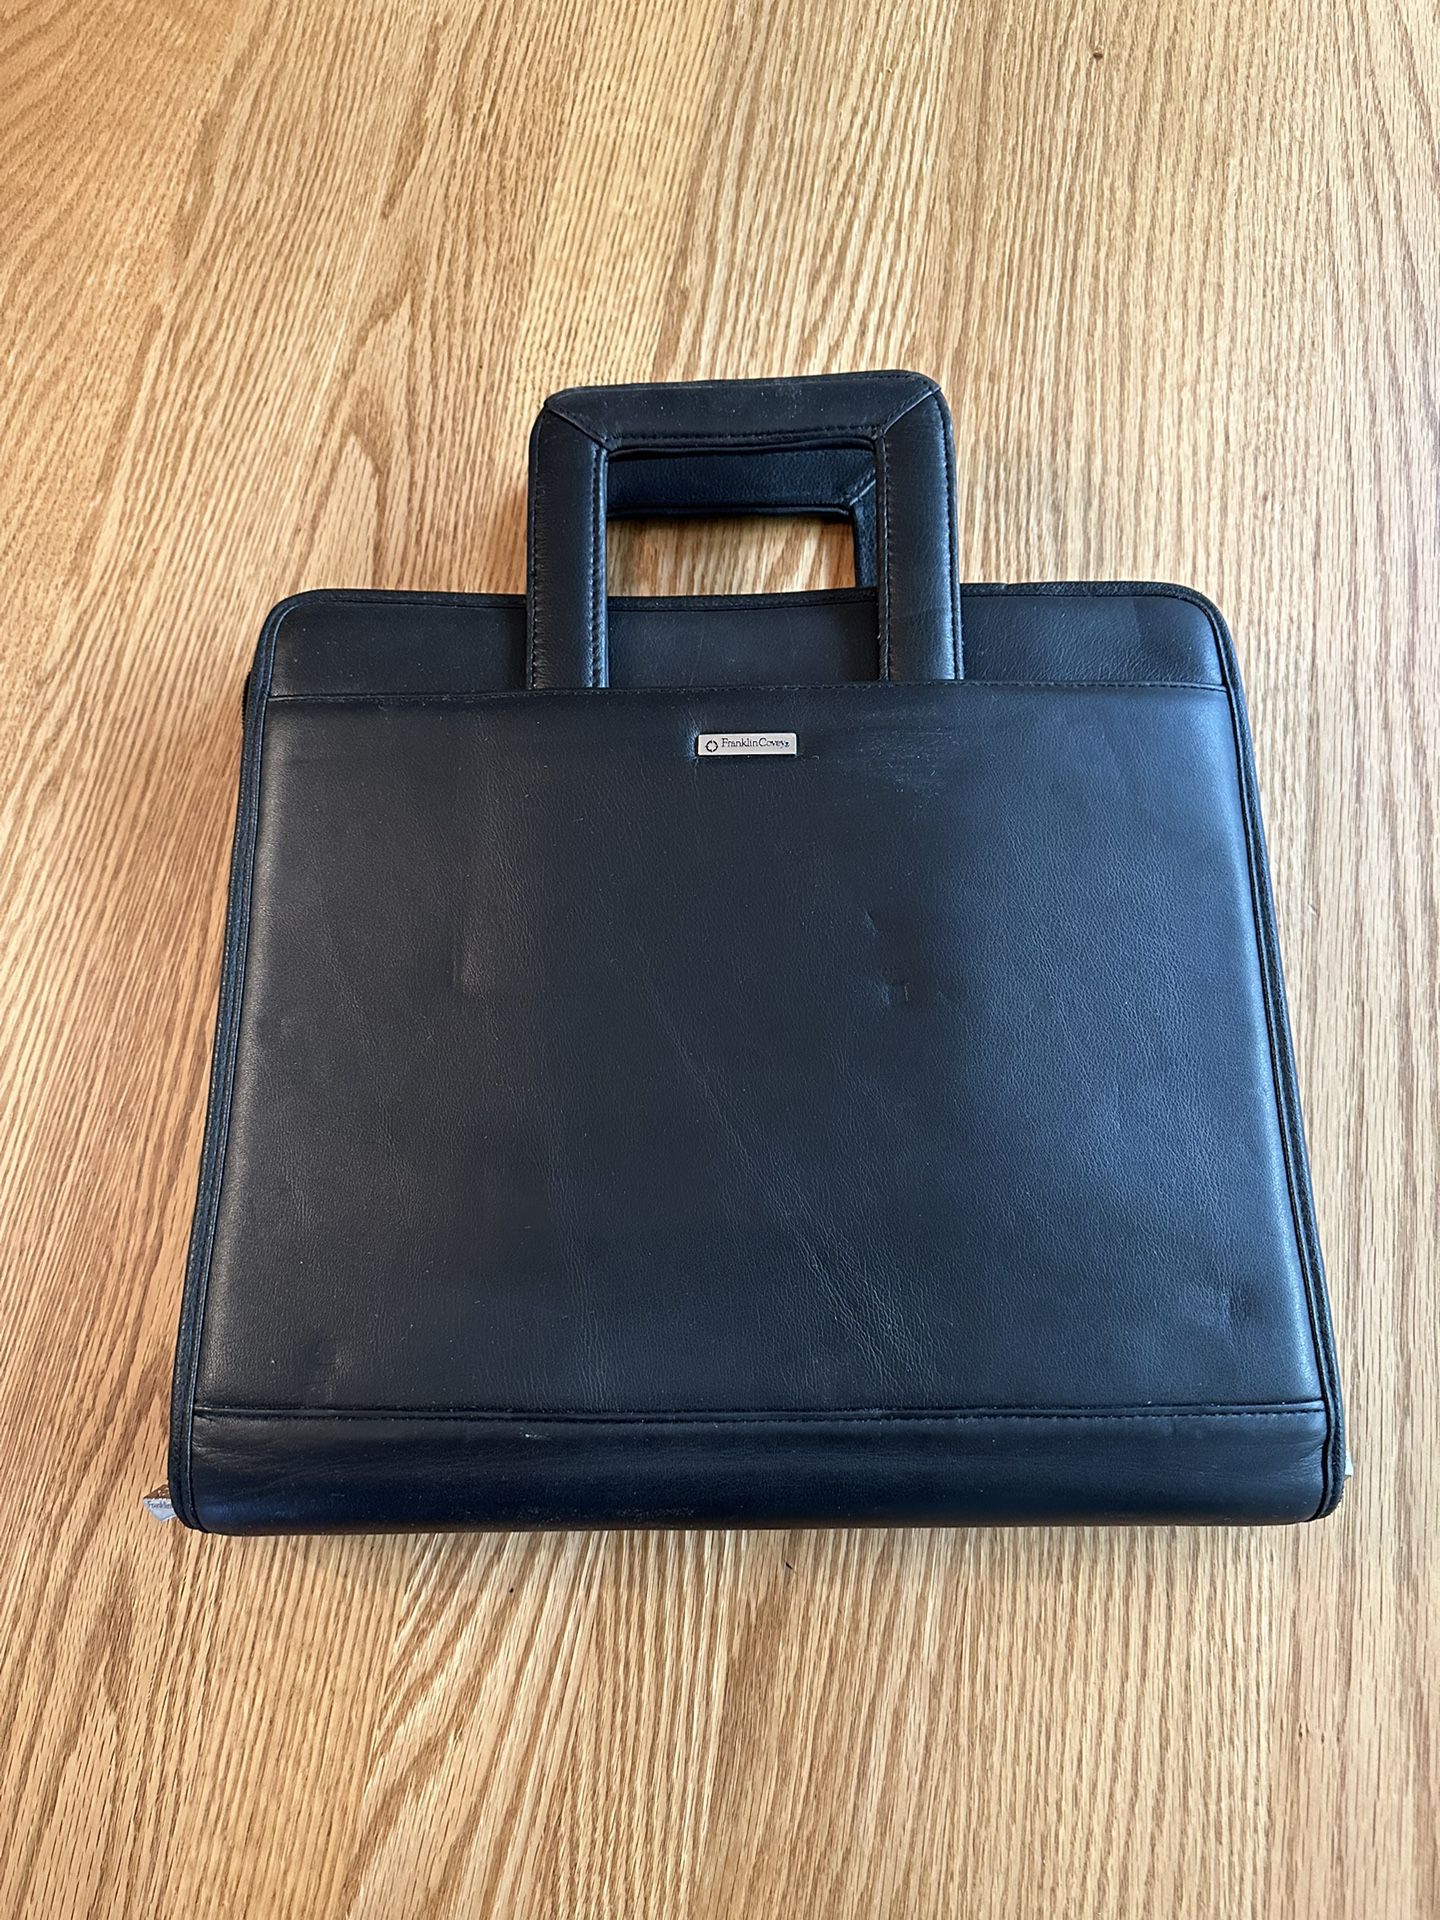 franklin covey tote